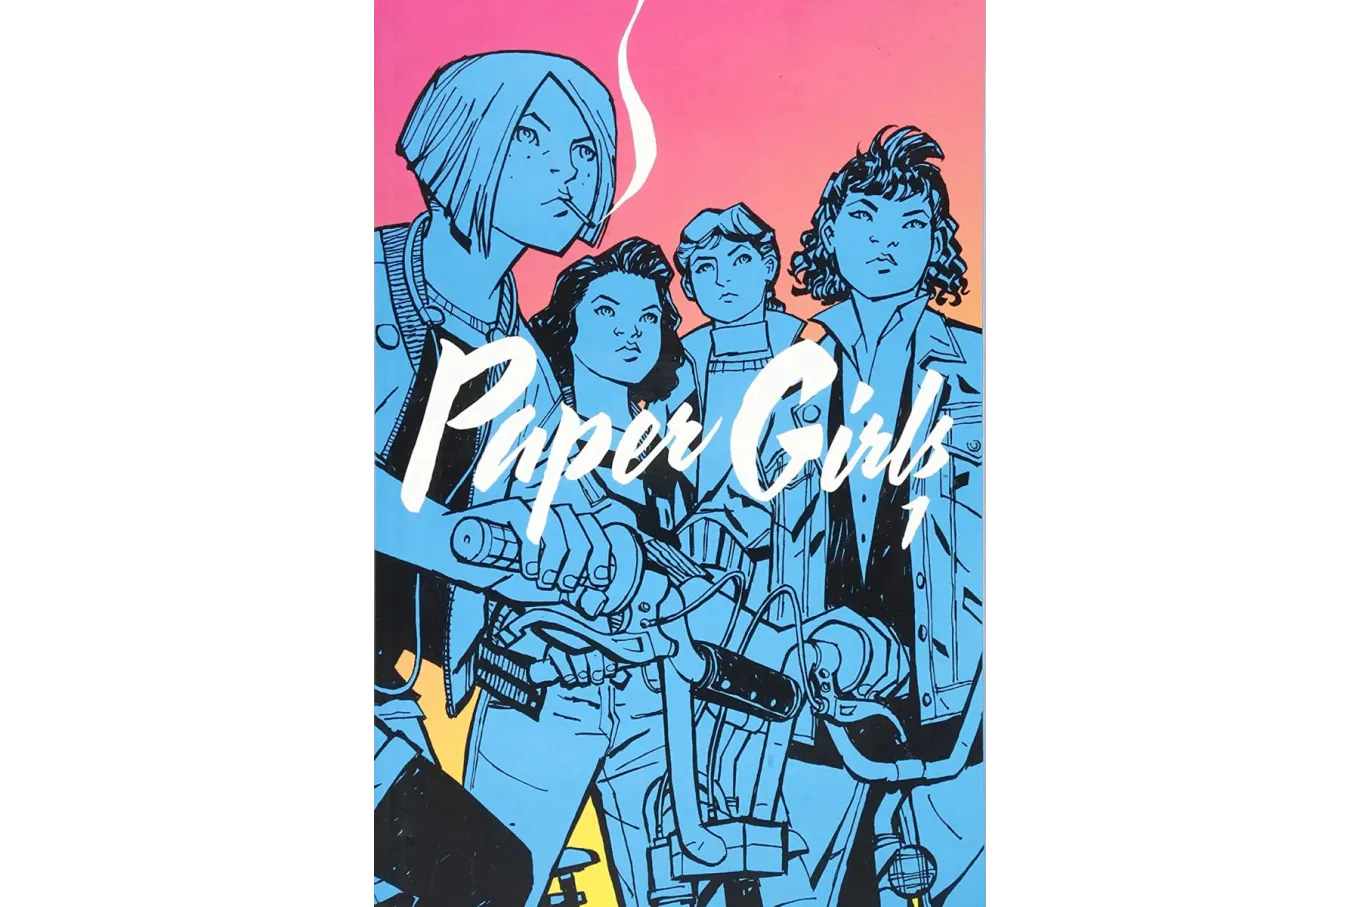 Cover of Paper Girls